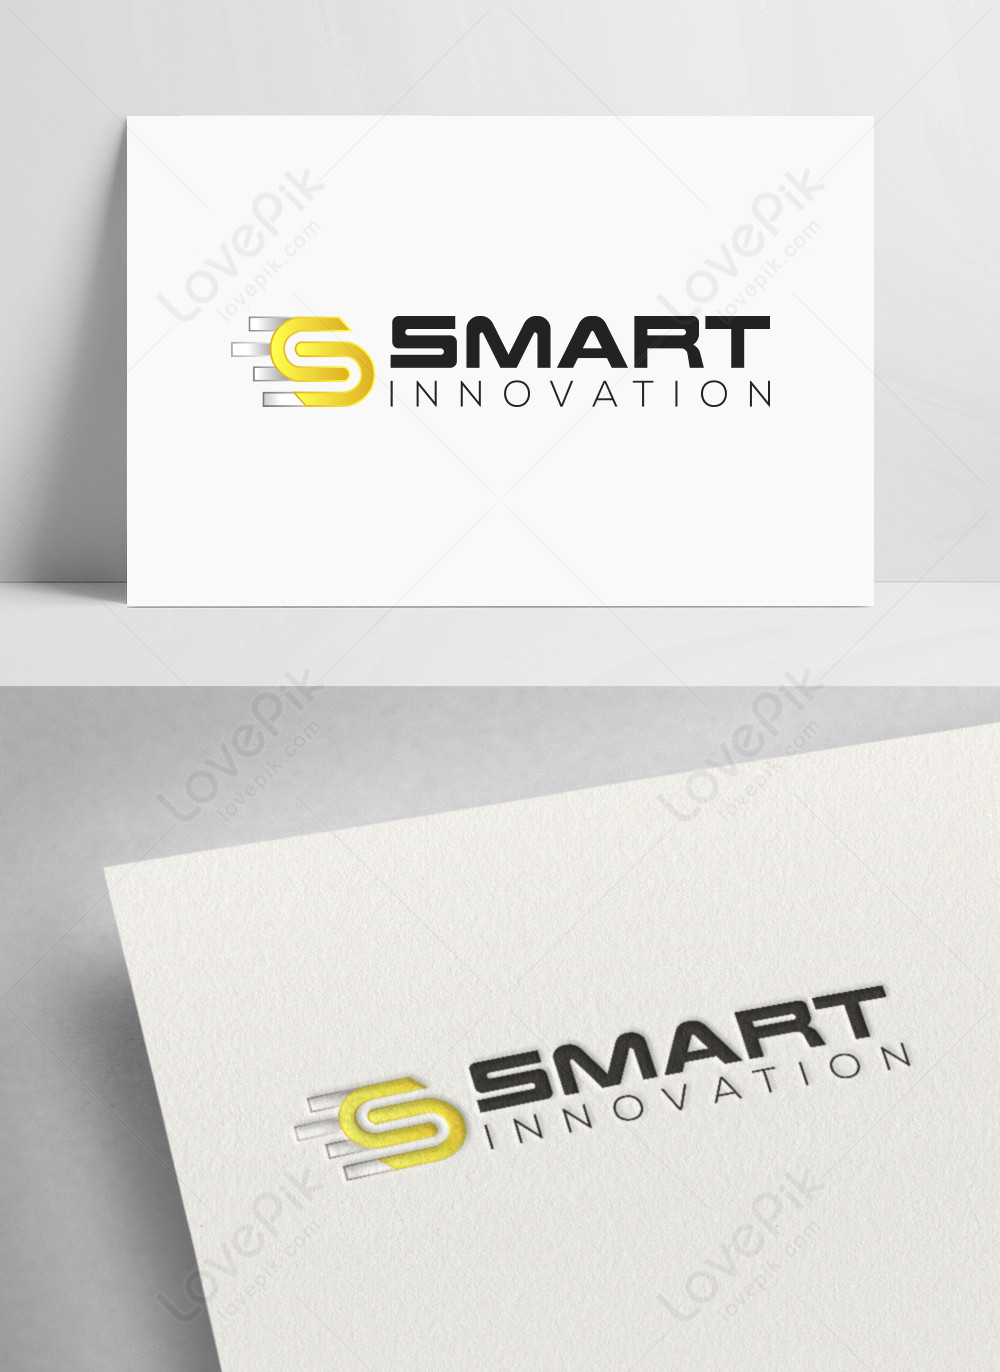 30+ Great Logos with Smart Concepts | WDD